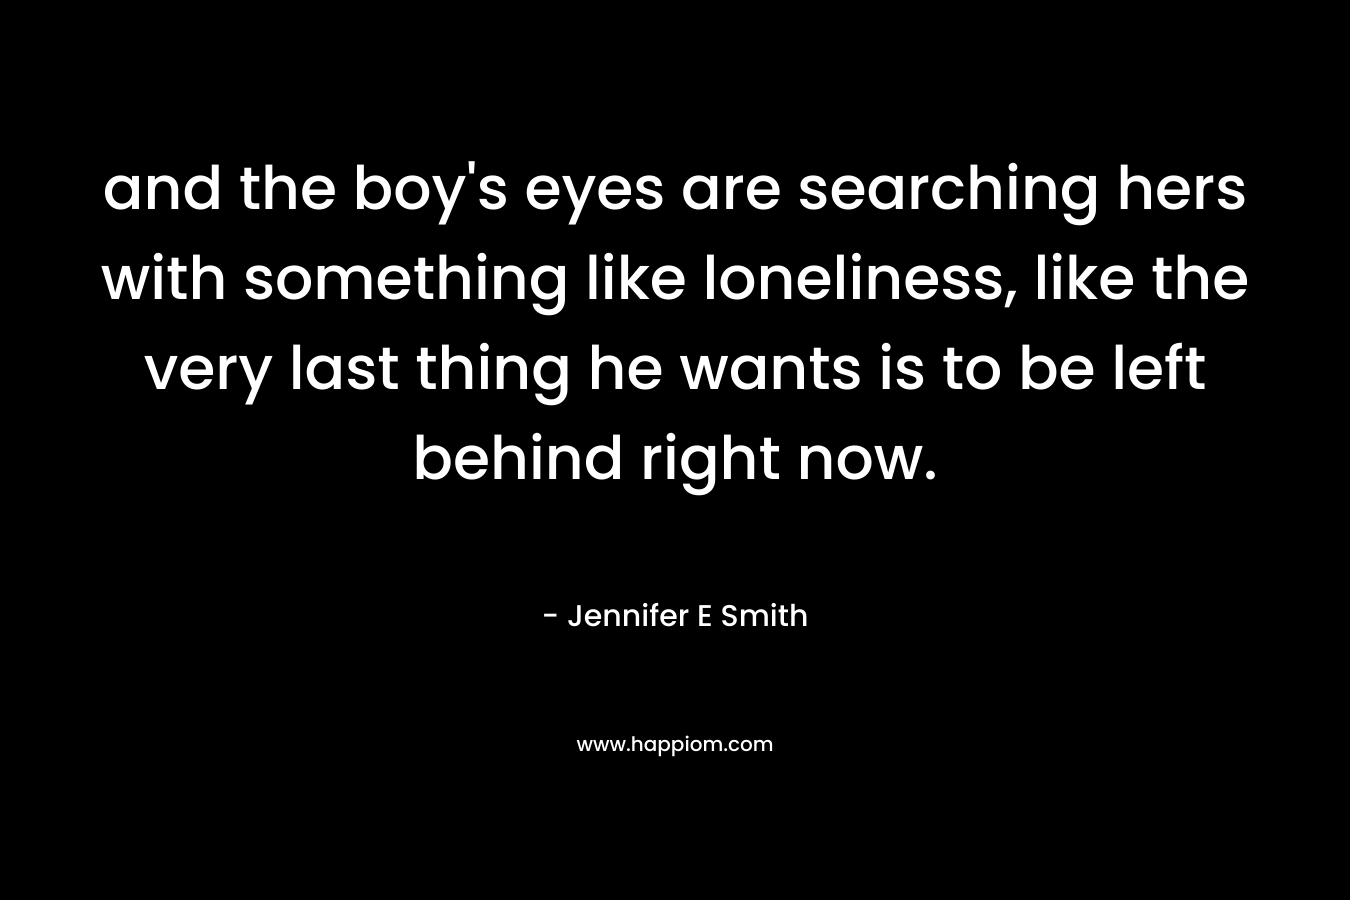 and the boy's eyes are searching hers with something like loneliness, like the very last thing he wants is to be left behind right now.